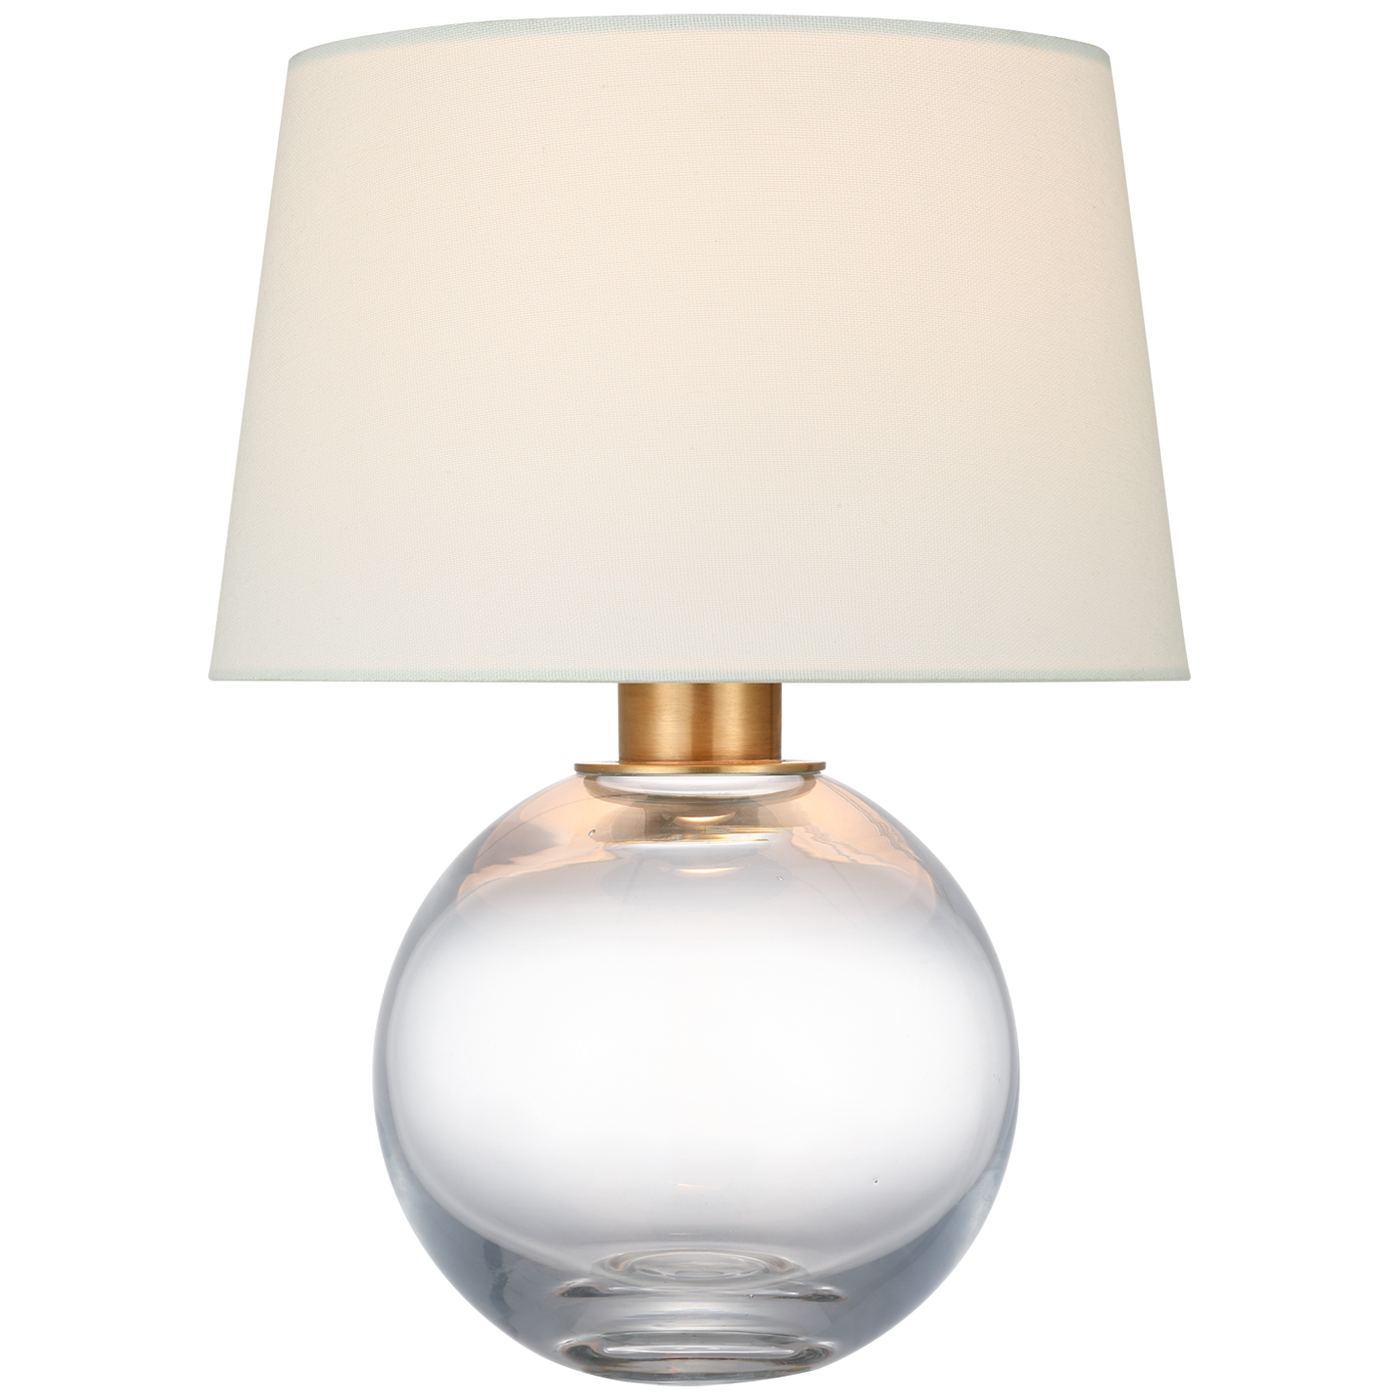 TABLE LAMP ROUND CLEAR GLASS